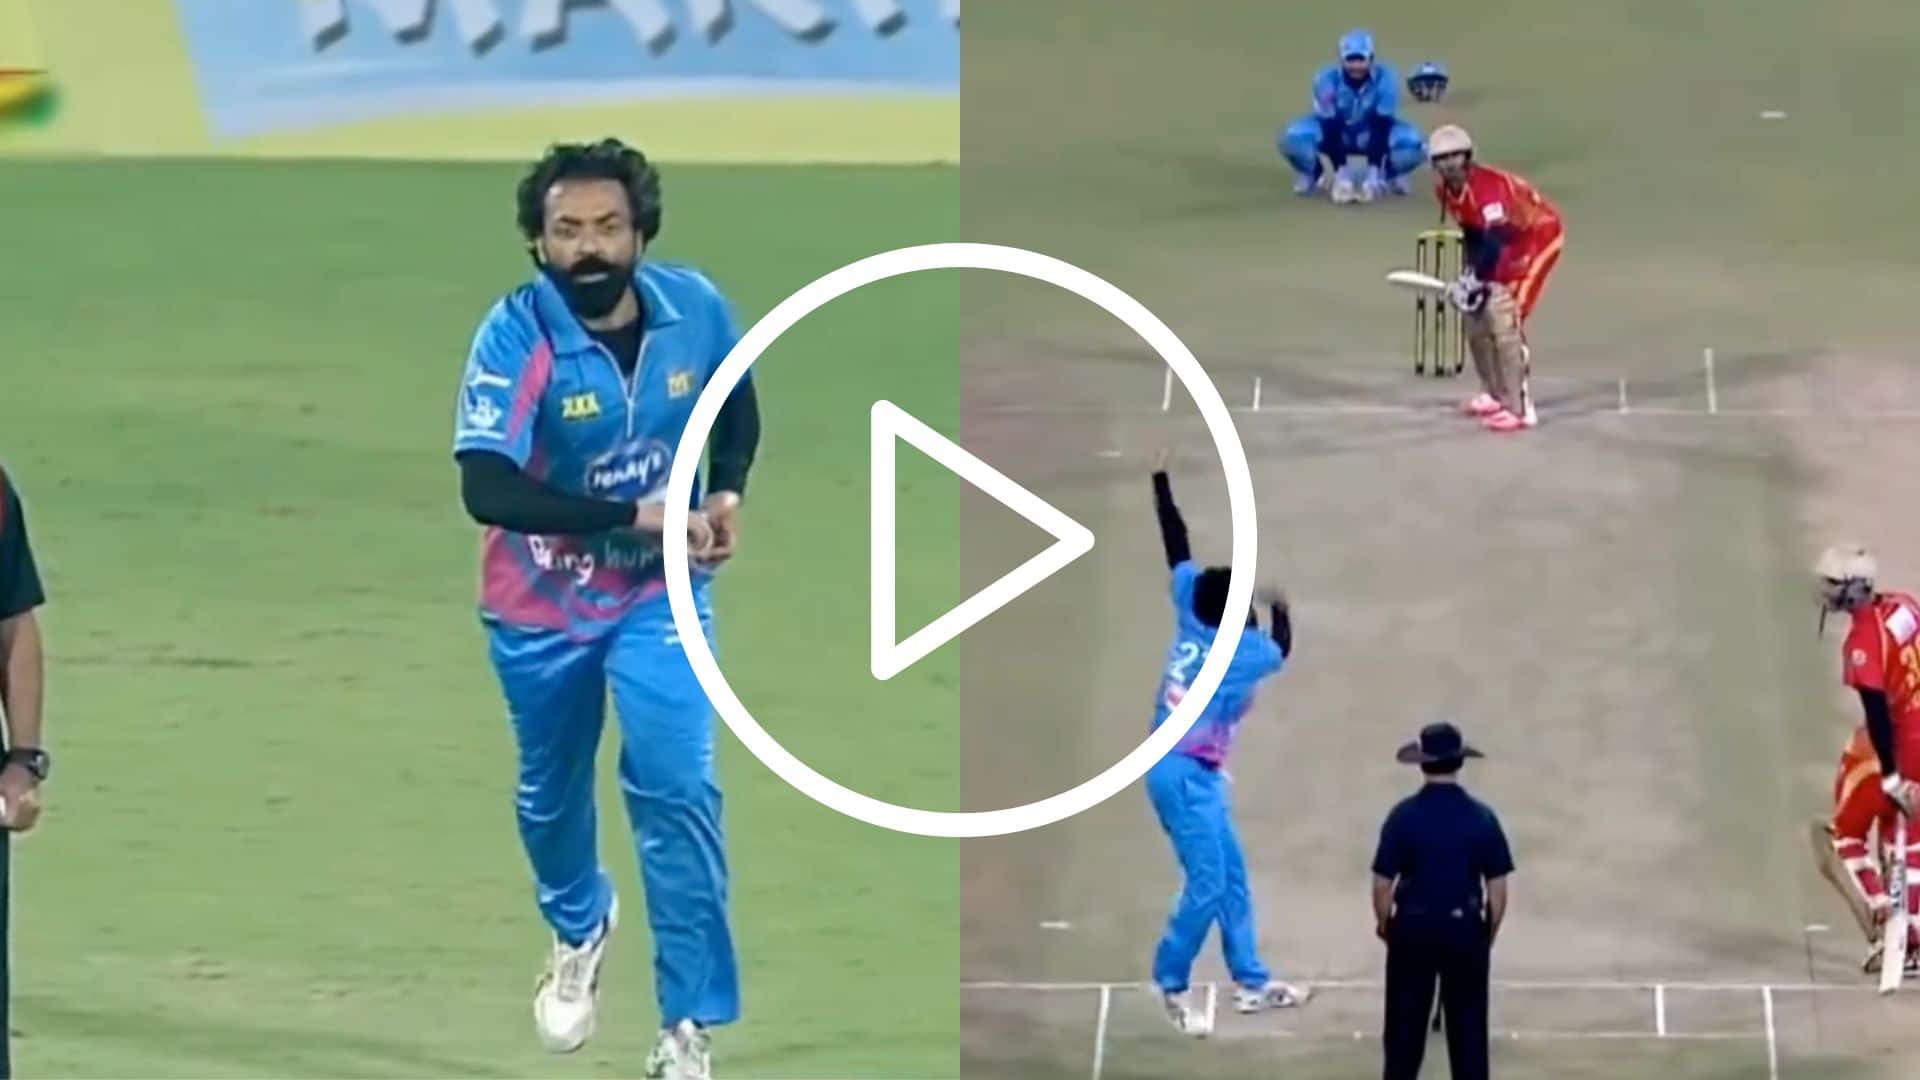 [Watch] When Bobby Deol Bowled Jasprit Bumrah-Esque Yorker In Celebrity Cricket League